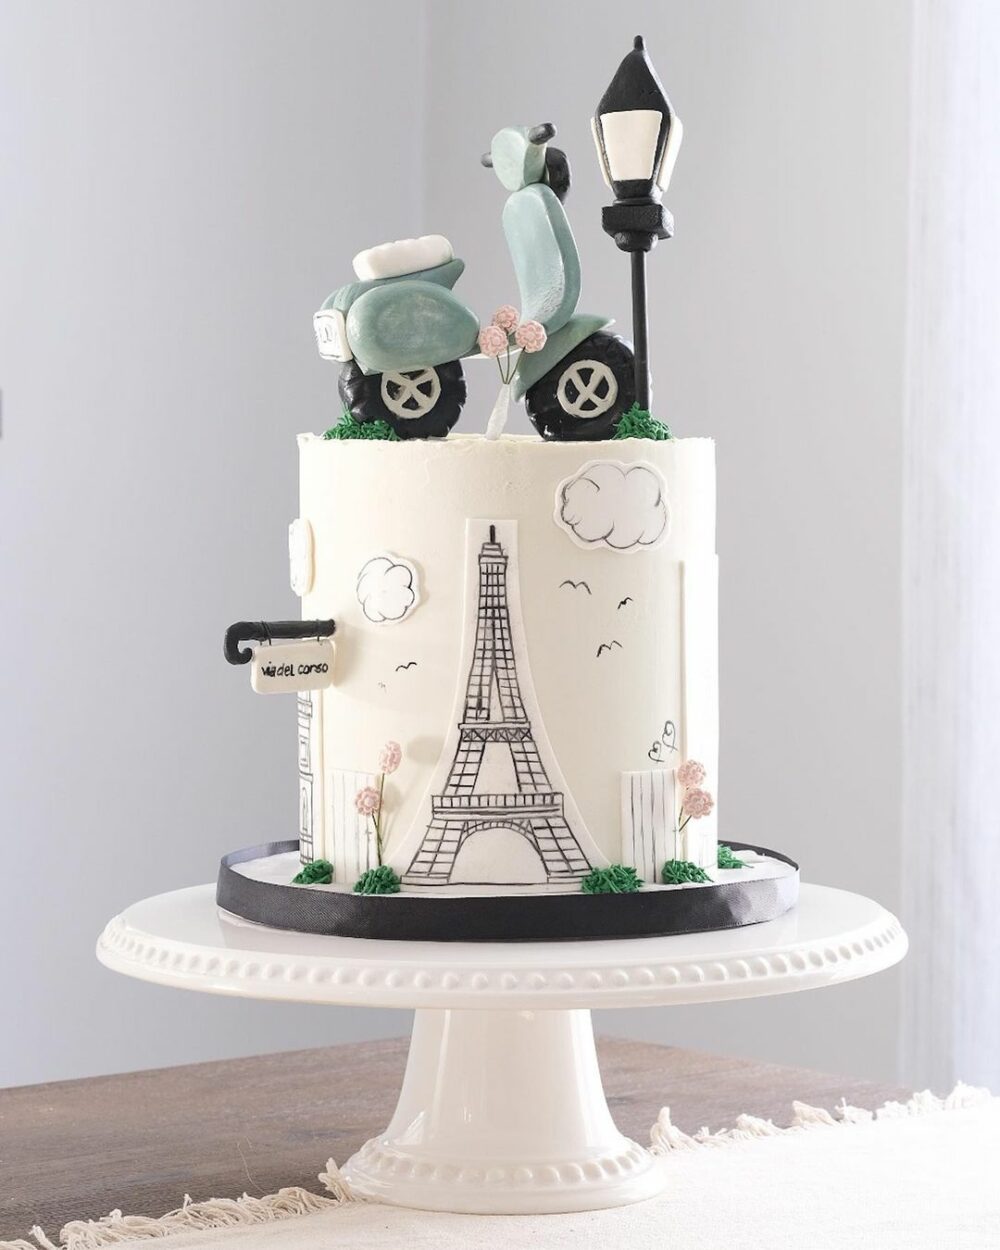 Have a wonderful time in Paris with this scooty cake for traveler.